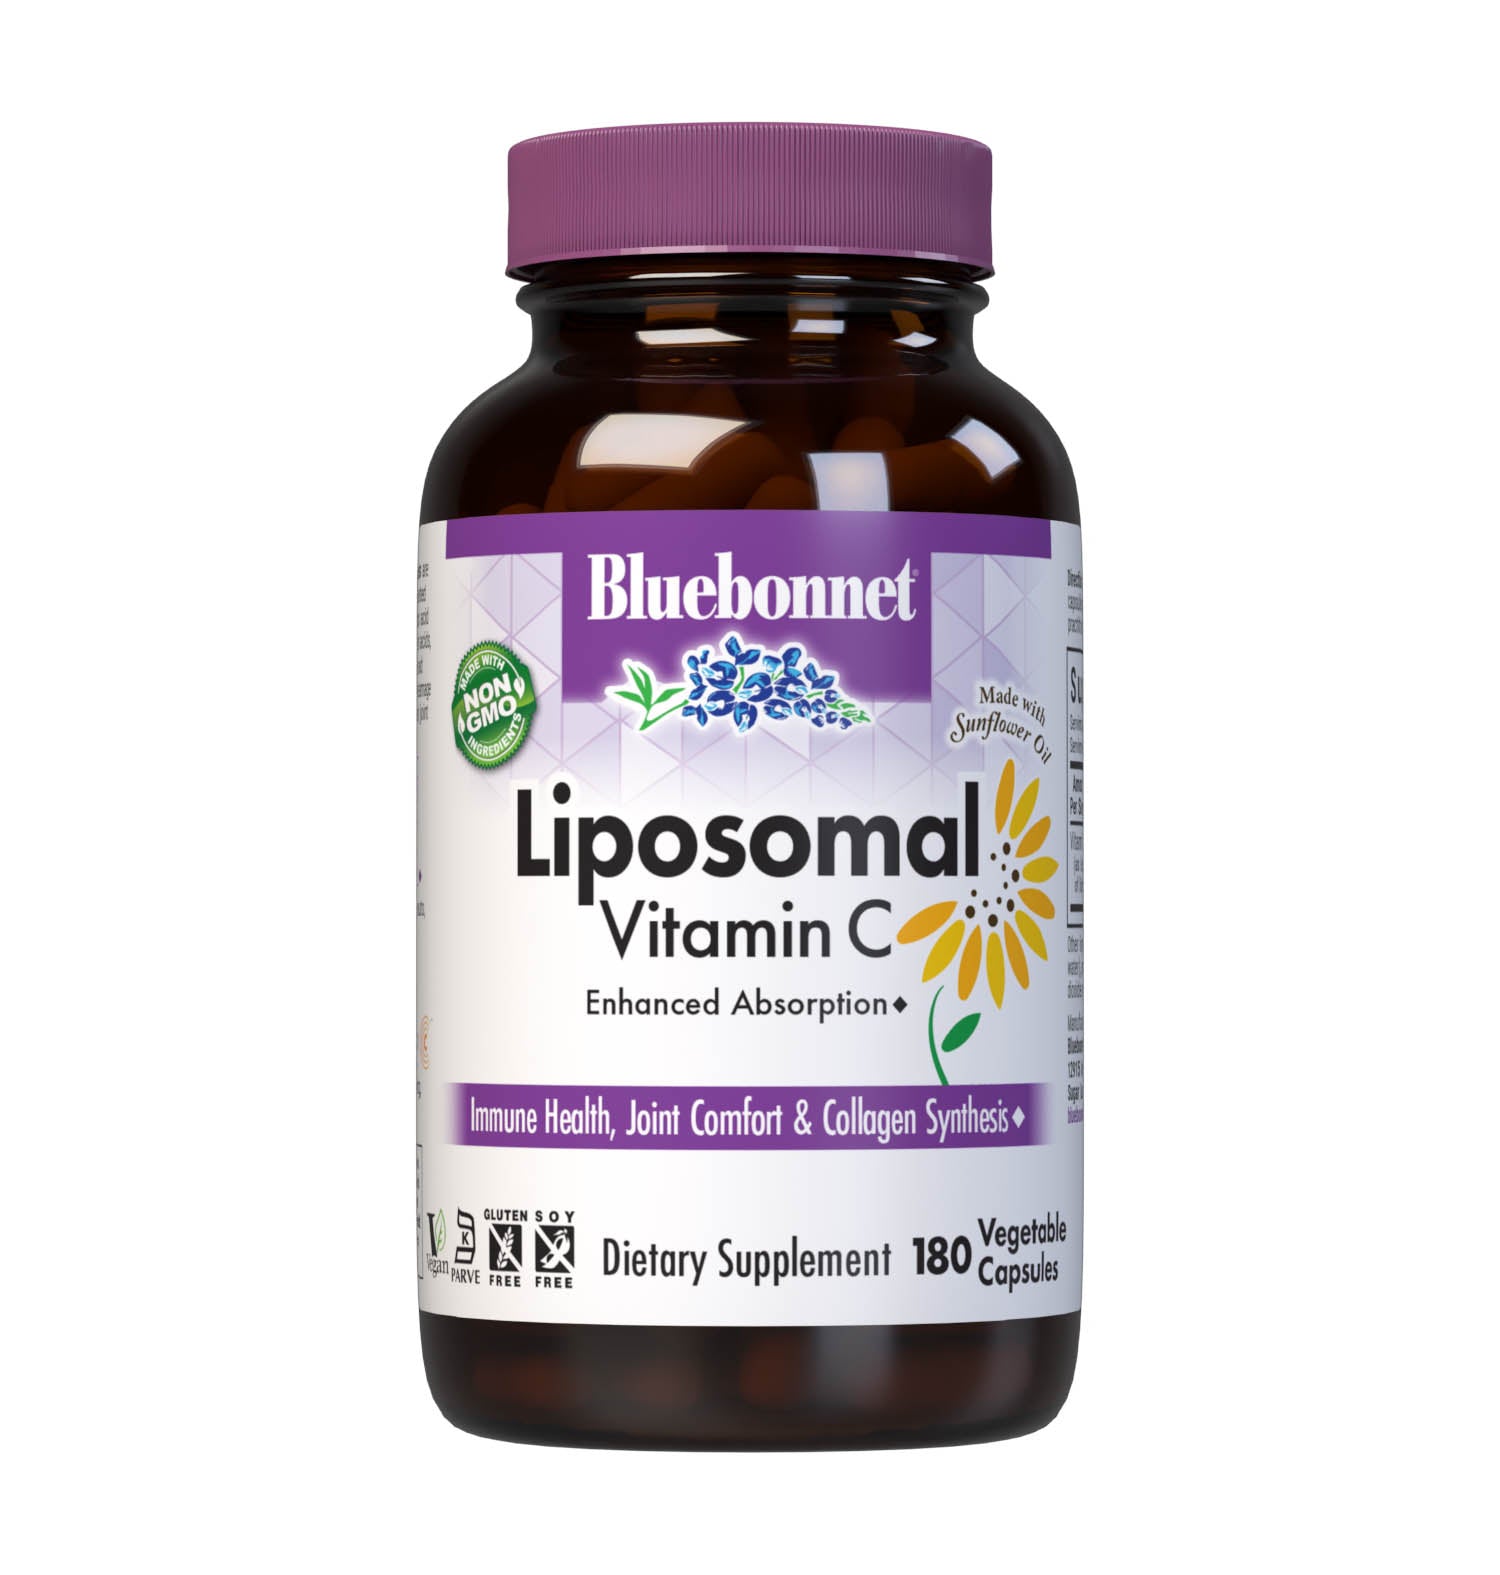 Formulated with Liposomal Pureway-C, 180 Vegetable Capsules a patented and clinically tested form of vitamin C that fuses ascorbic acid and citrus bioflavonoids to lipid metabolites such as fatty acids, esters, and fatty alcohols for better delivery, absorption and uptake to help support immune health, joint comfort & collagen synthesis. #size_180 count